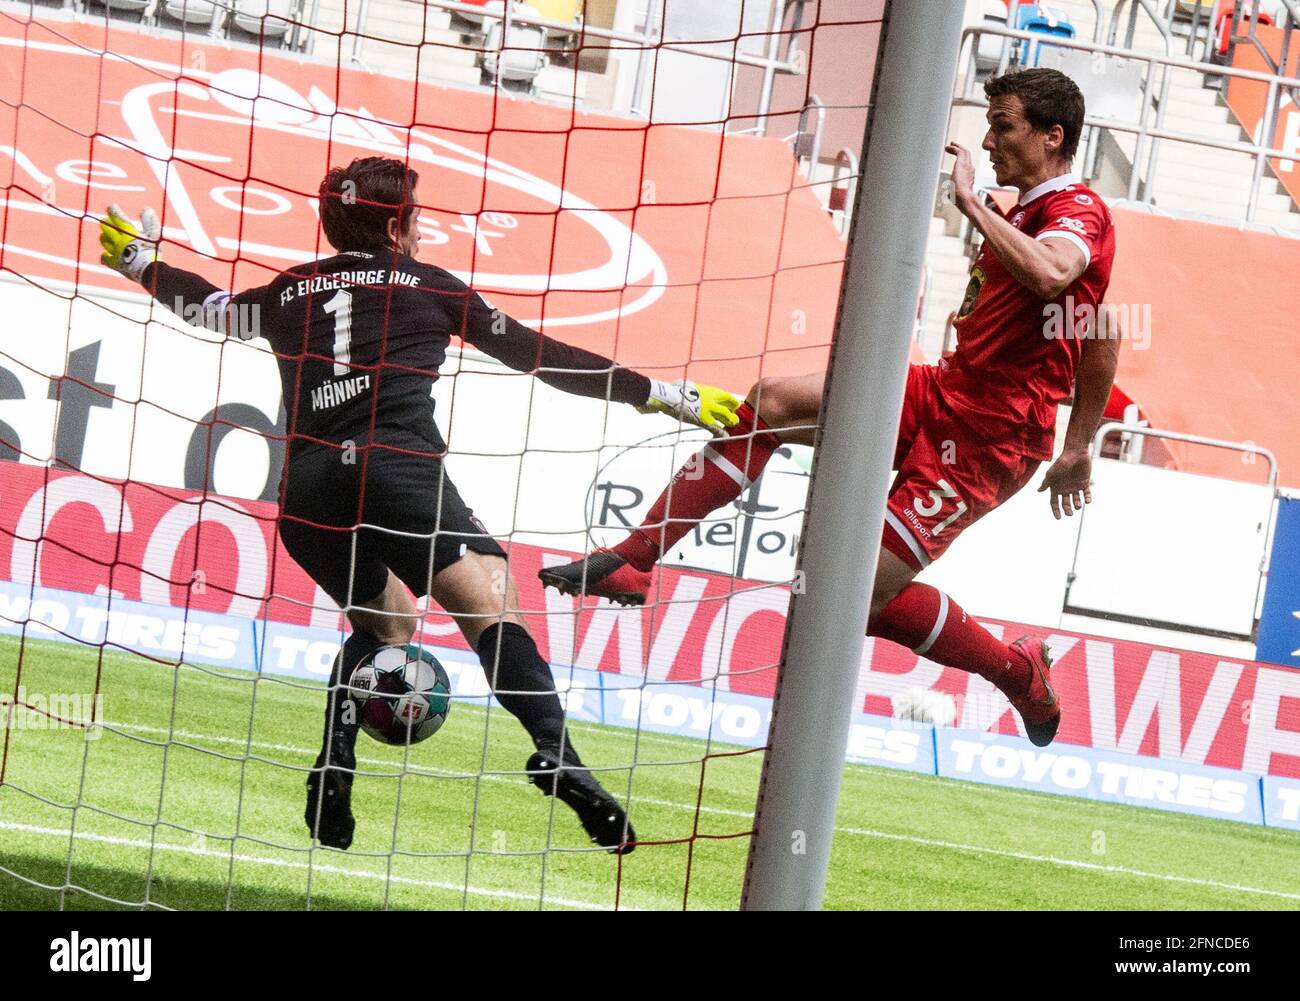 Duesseldorf, Germany. 16th May, 2021. Football: 2. Bundesliga, Fortuna Düsseldorf - Erzgebirge Aue, 33. matchday at Merkus Spiel-Arena: Düsseldorf's midfielder Marcel Sobottka (r) scores against Aue's goalkeeper Martin Männel to make it 2:0. Credit: Bernd Thissen/dpa - IMPORTANT NOTE: In accordance with the regulations of the DFL Deutsche Fußball Liga and/or the DFB Deutscher Fußball-Bund, it is prohibited to use or have used photographs taken in the stadium and/or of the match in the form of sequence pictures and/or video-like photo series./dpa/Alamy Live News Stock Photo